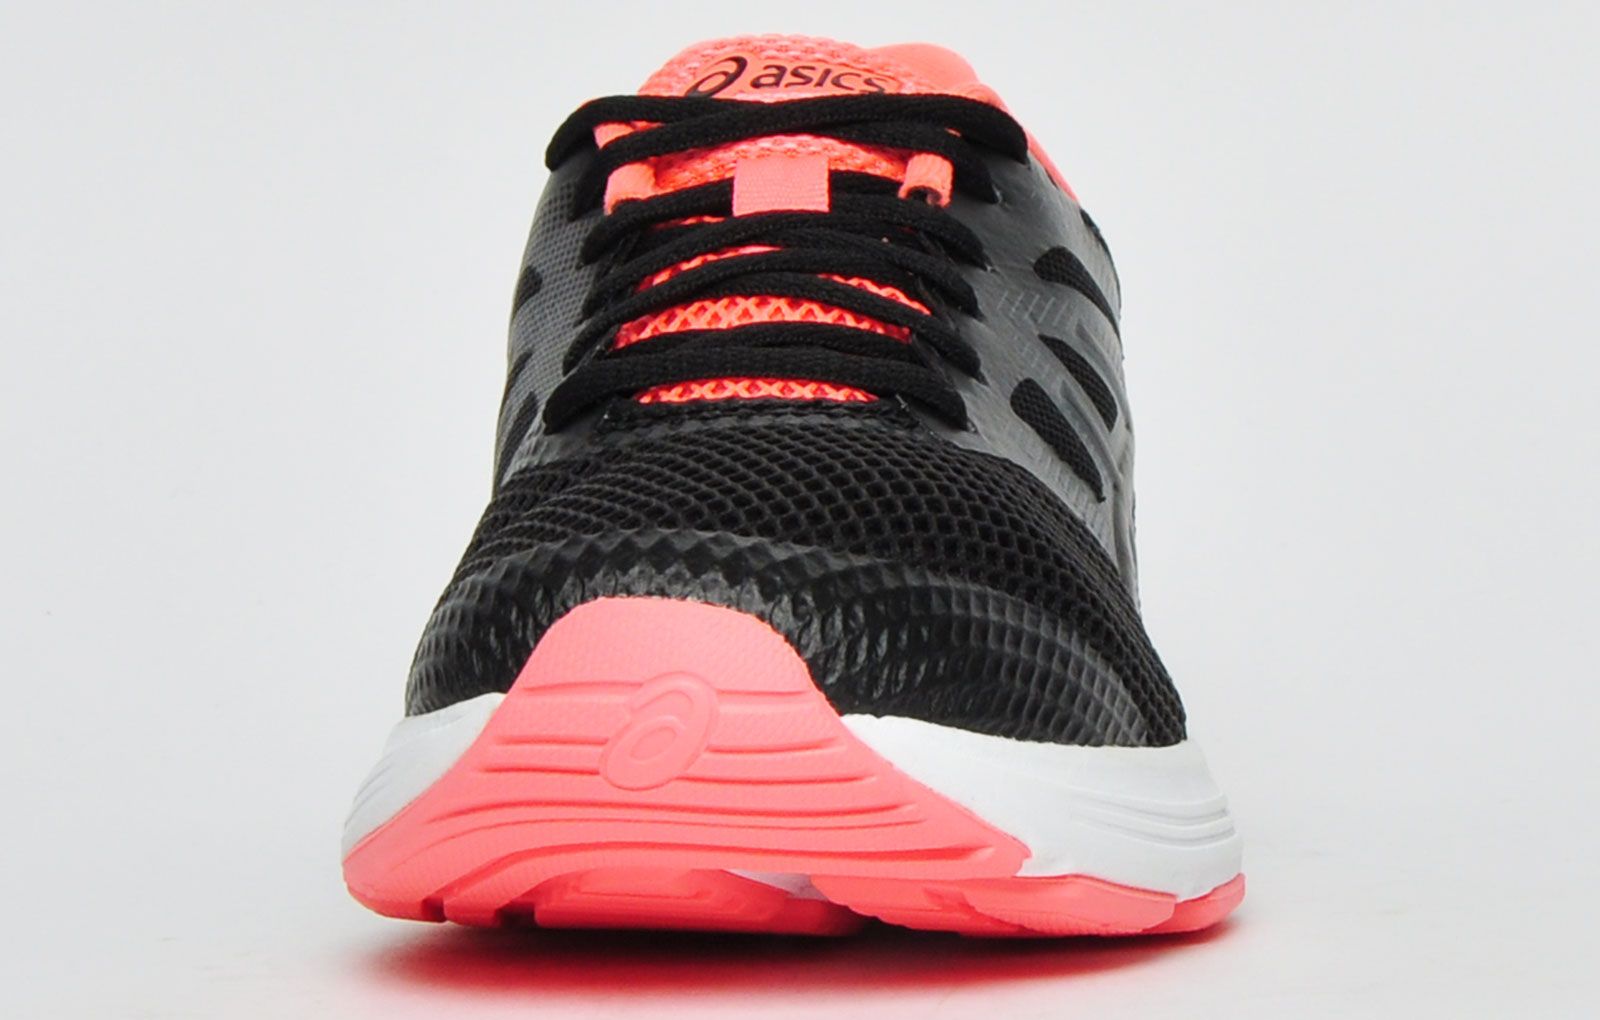 Approved and recommended by the American Podiatric Medical Association, These Gel Exalt 5 womens running shoes are designed for optimal foot health and subtly blend together premium comfort and state of the art running technology. Featuring the DuoMax support system and Rearfoot Gel cushioning to enhance support even further and deliver underfoot comfort like never before.<p></p>